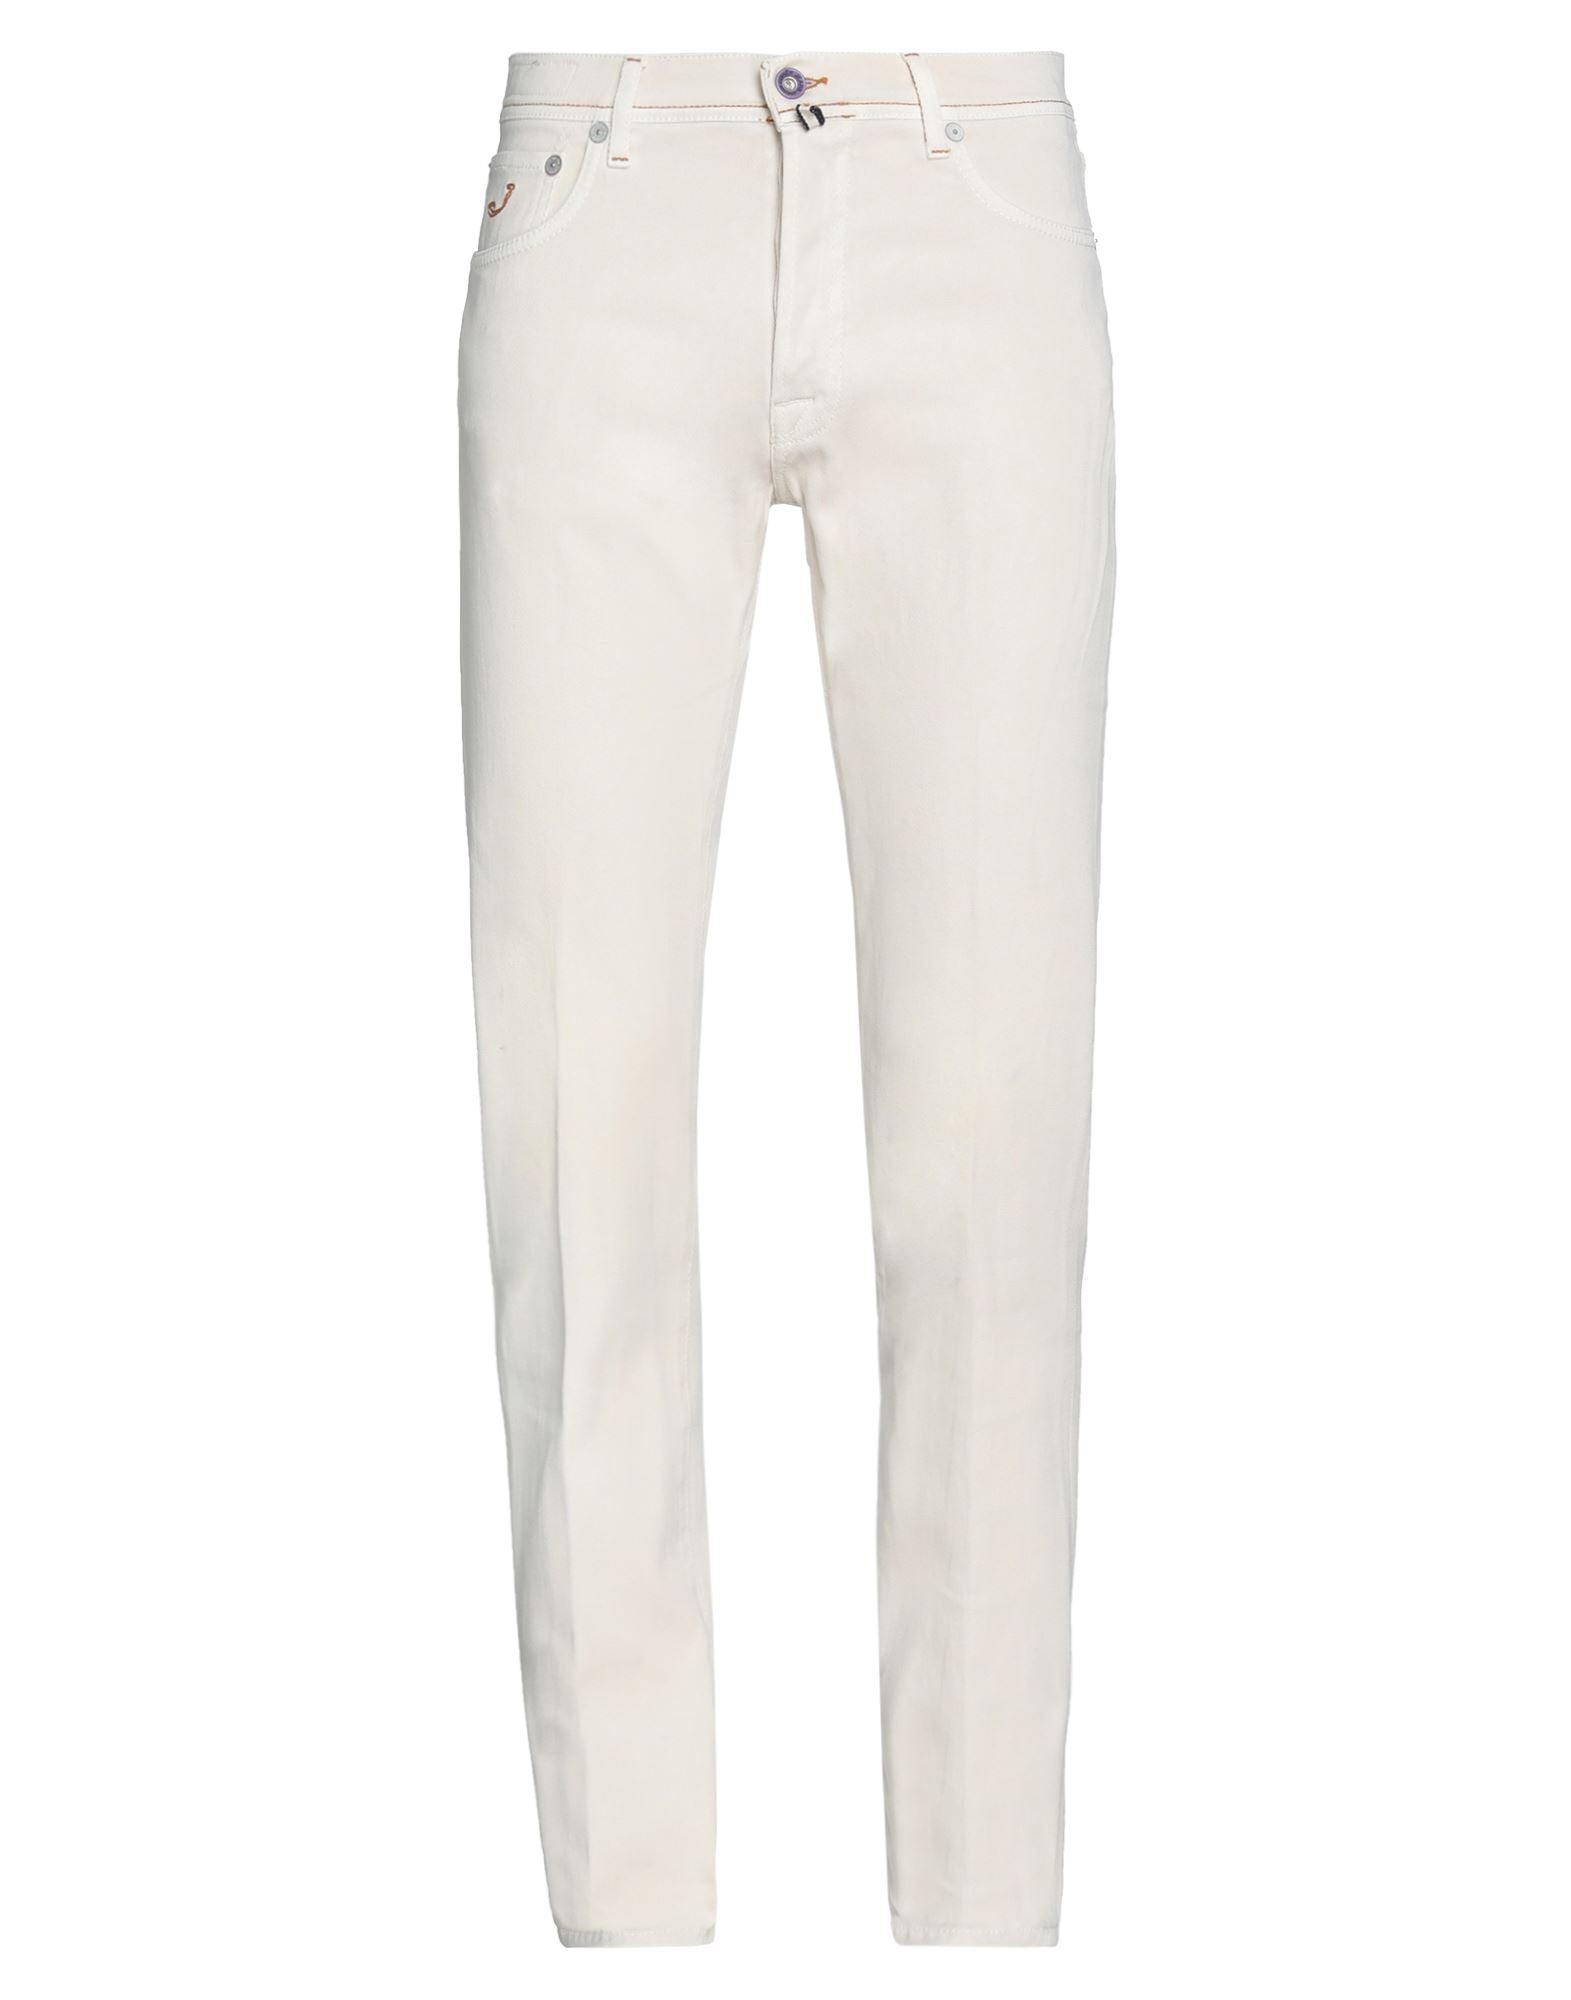 Jacob Cohёn Pants In Ivory